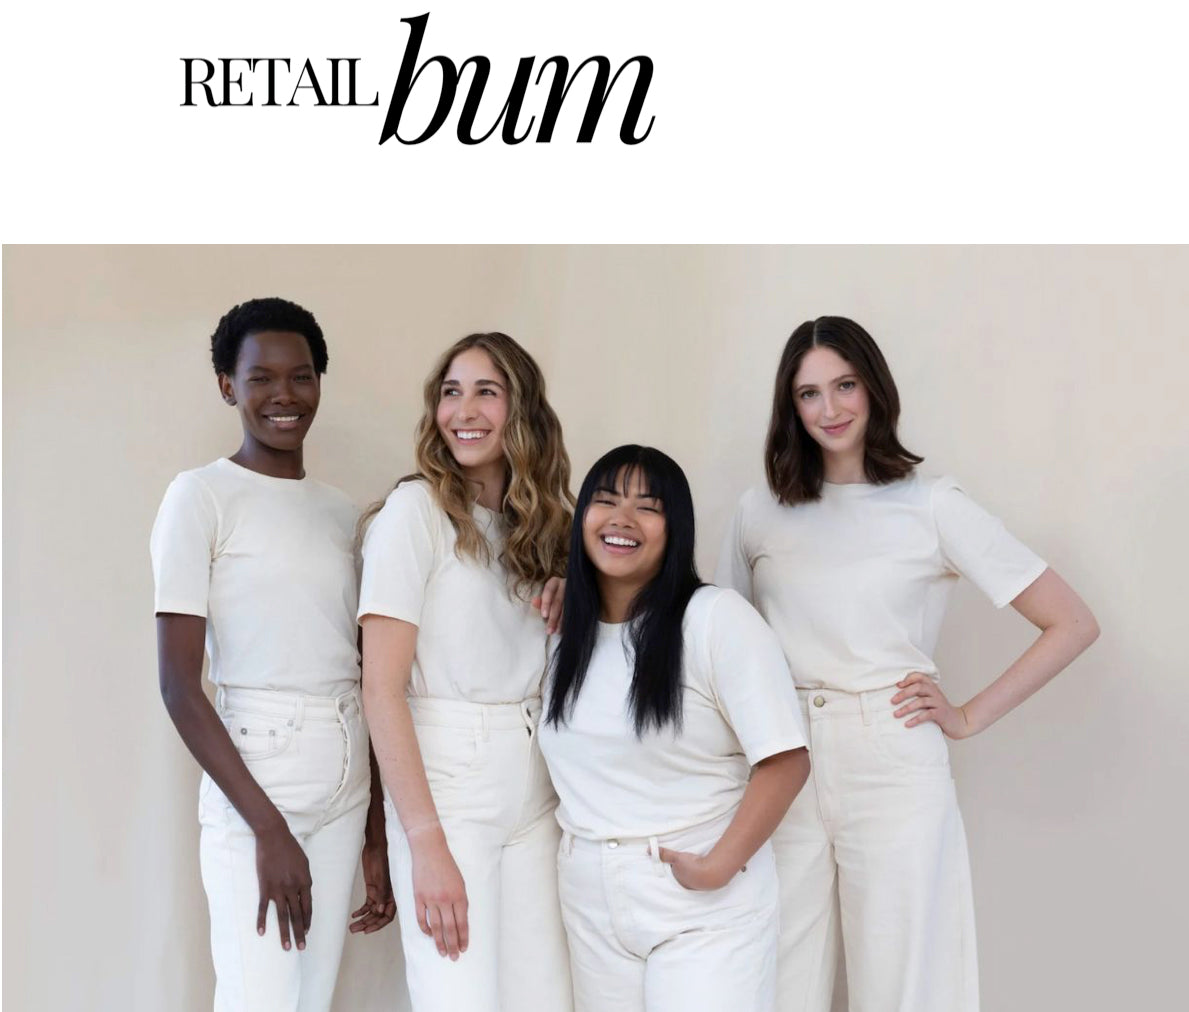 ROTE featured in RETAIL BUM: Sustainable Clothing Brand ROTE Looks to Food and Wellness Industry For Inspiration